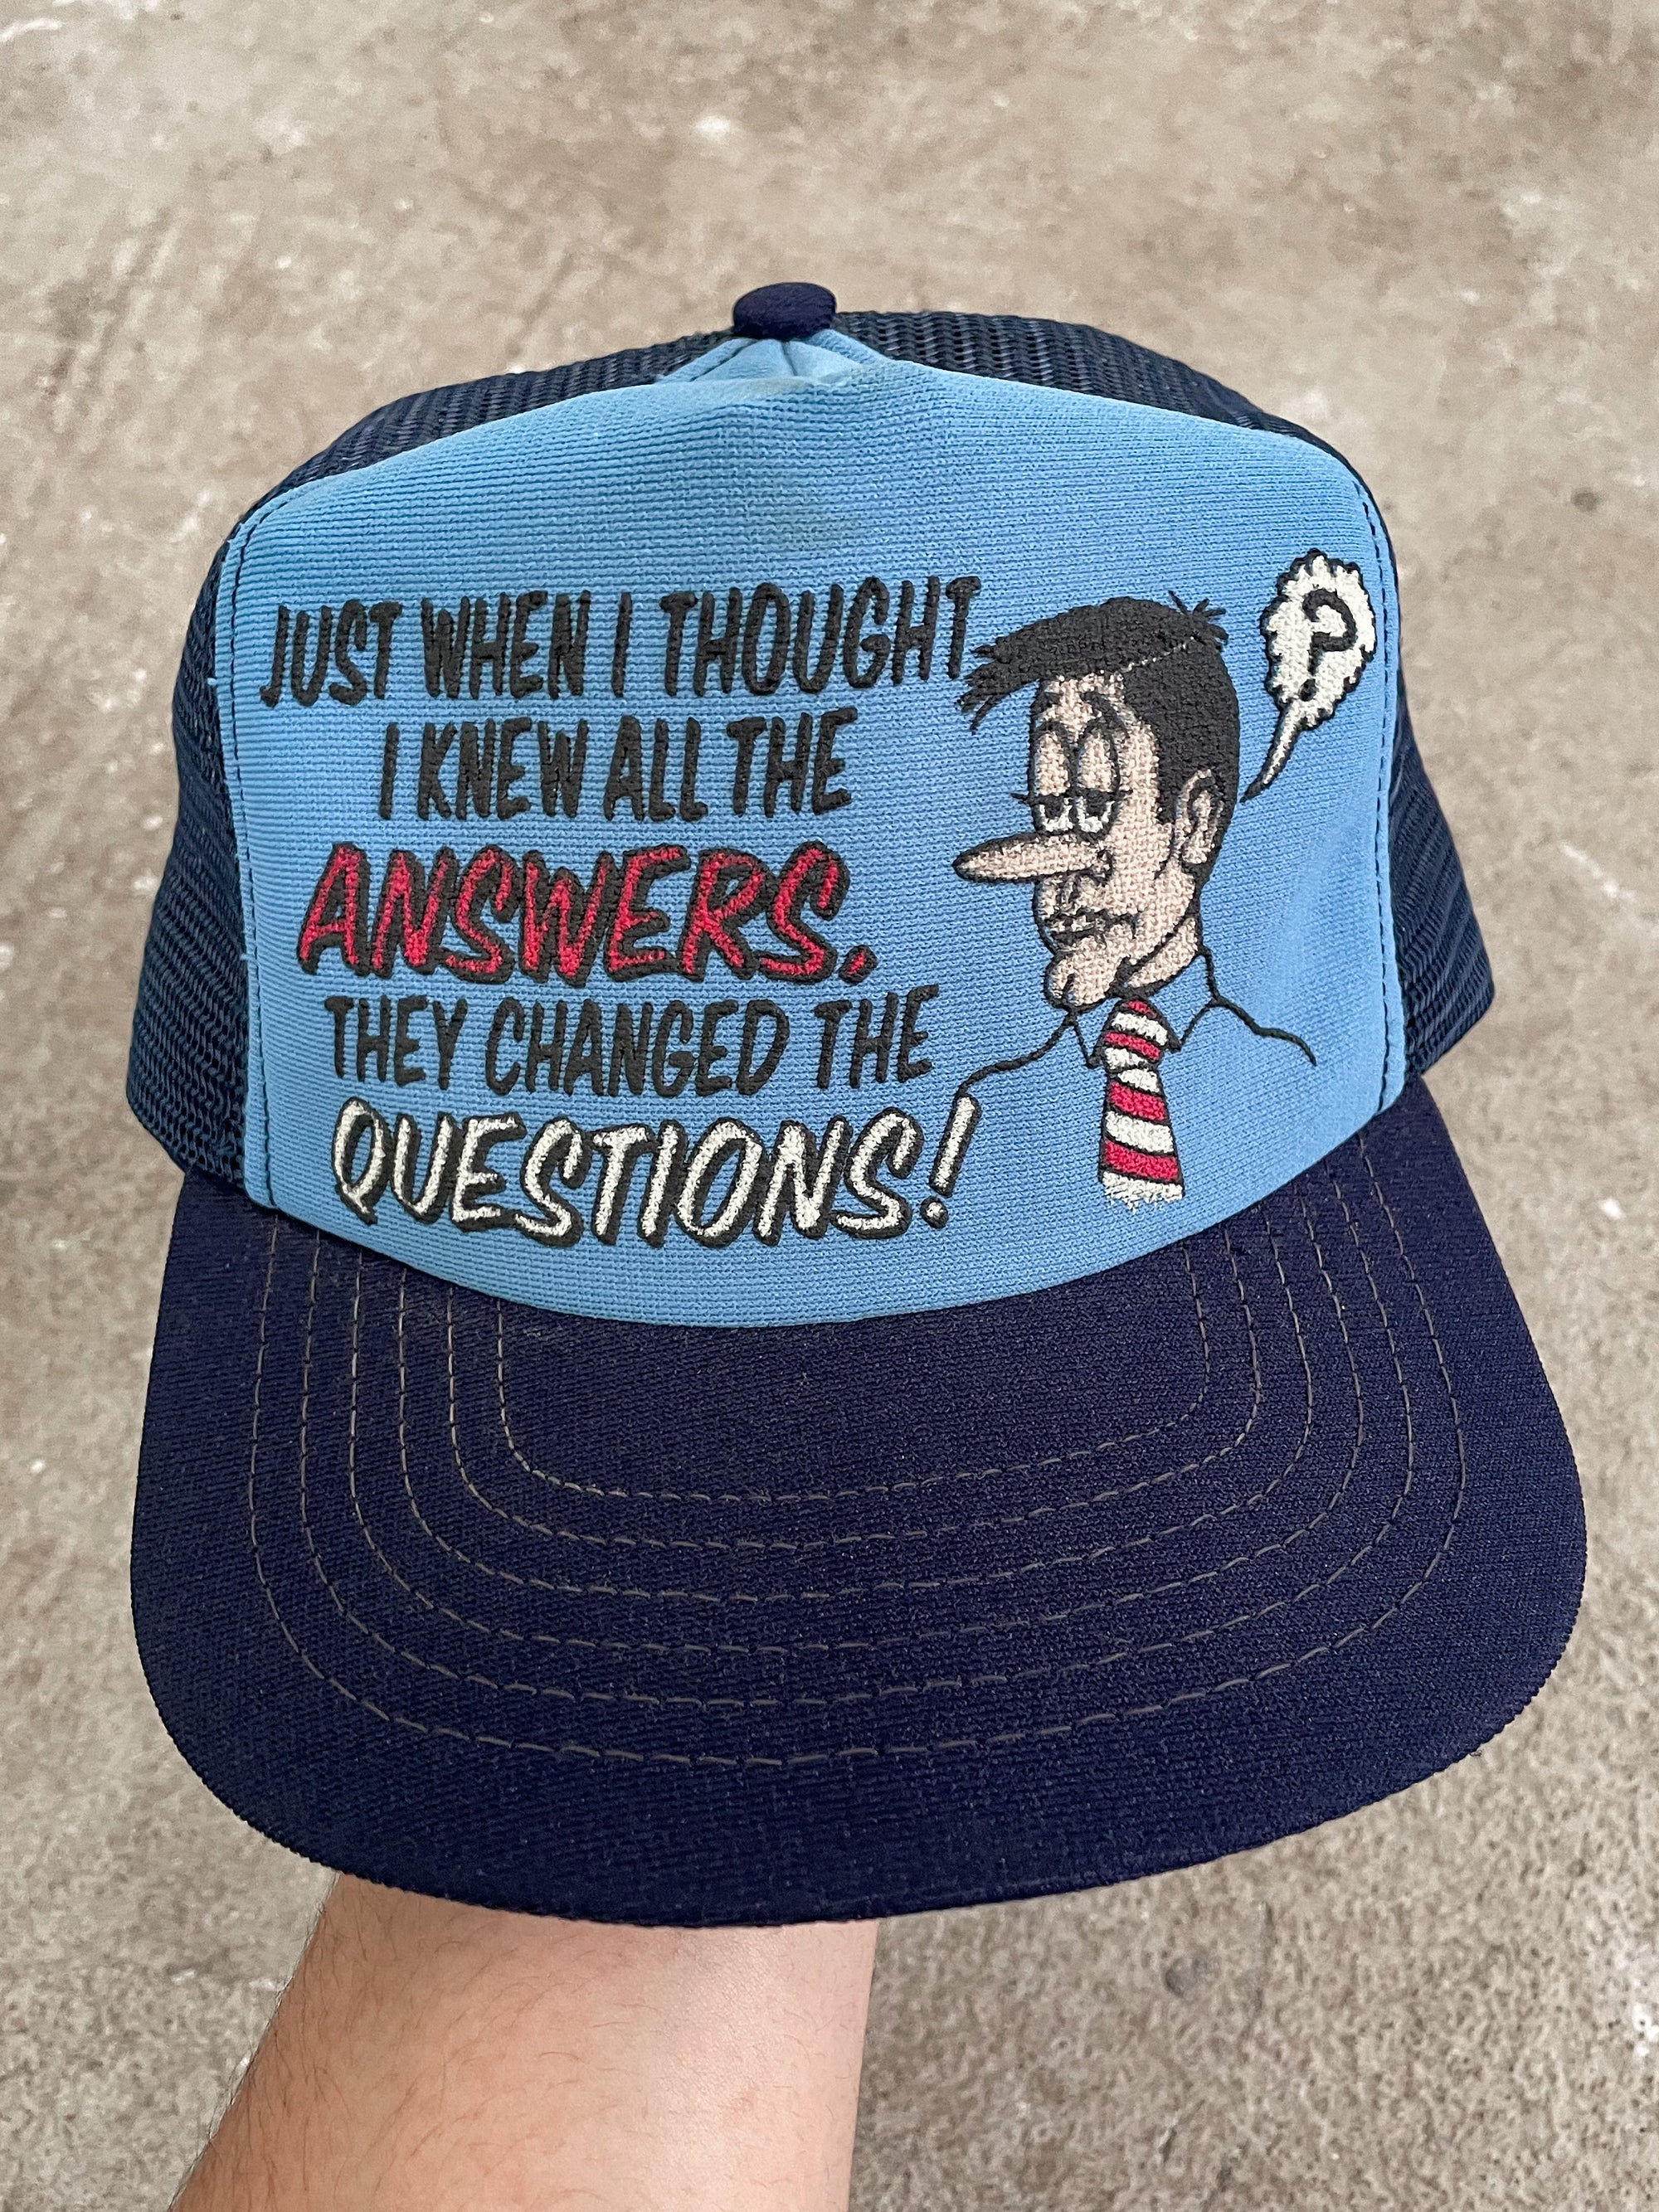 1980s “Just When I Thought I Knew All The Answers…” Trucker Hat